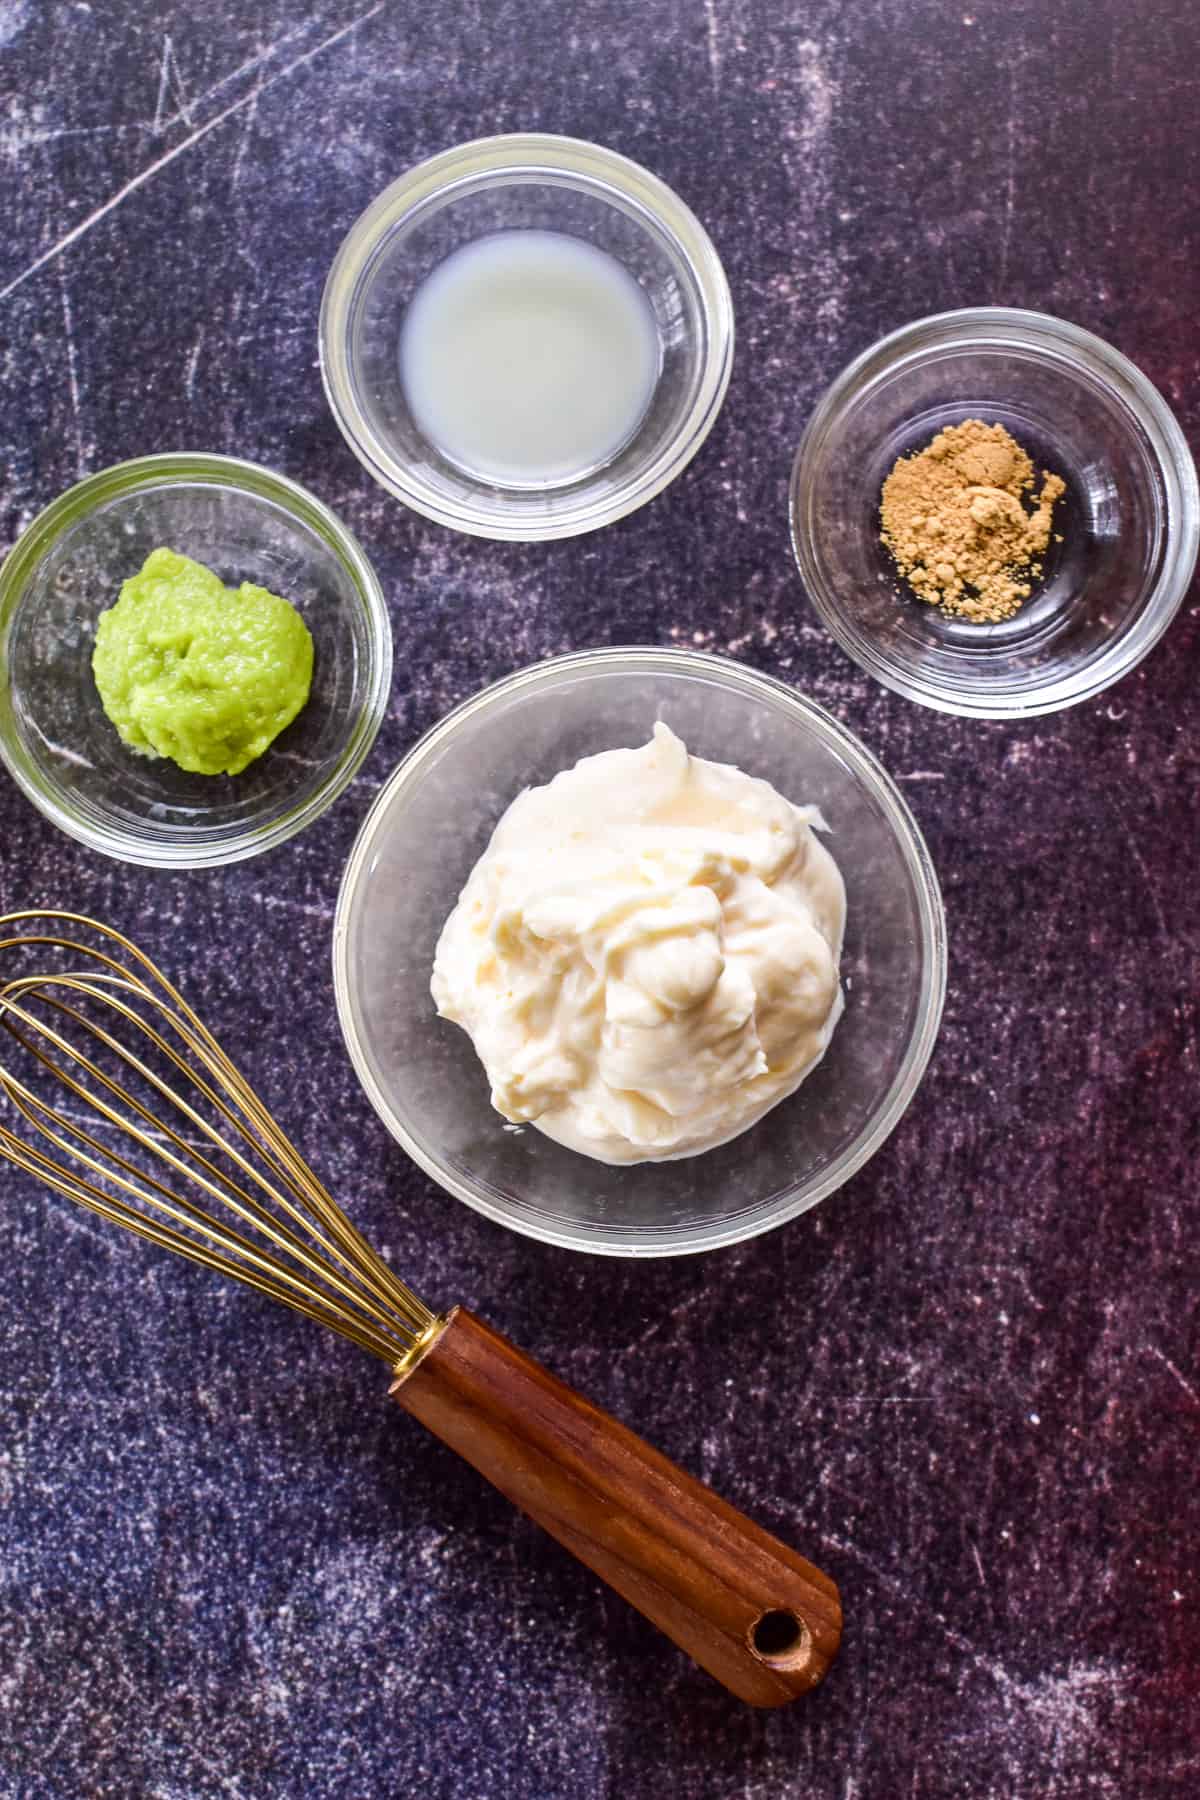 Wasabi Mayo ingredients in clear glass mixing bowls with a gold and wood handled whisk